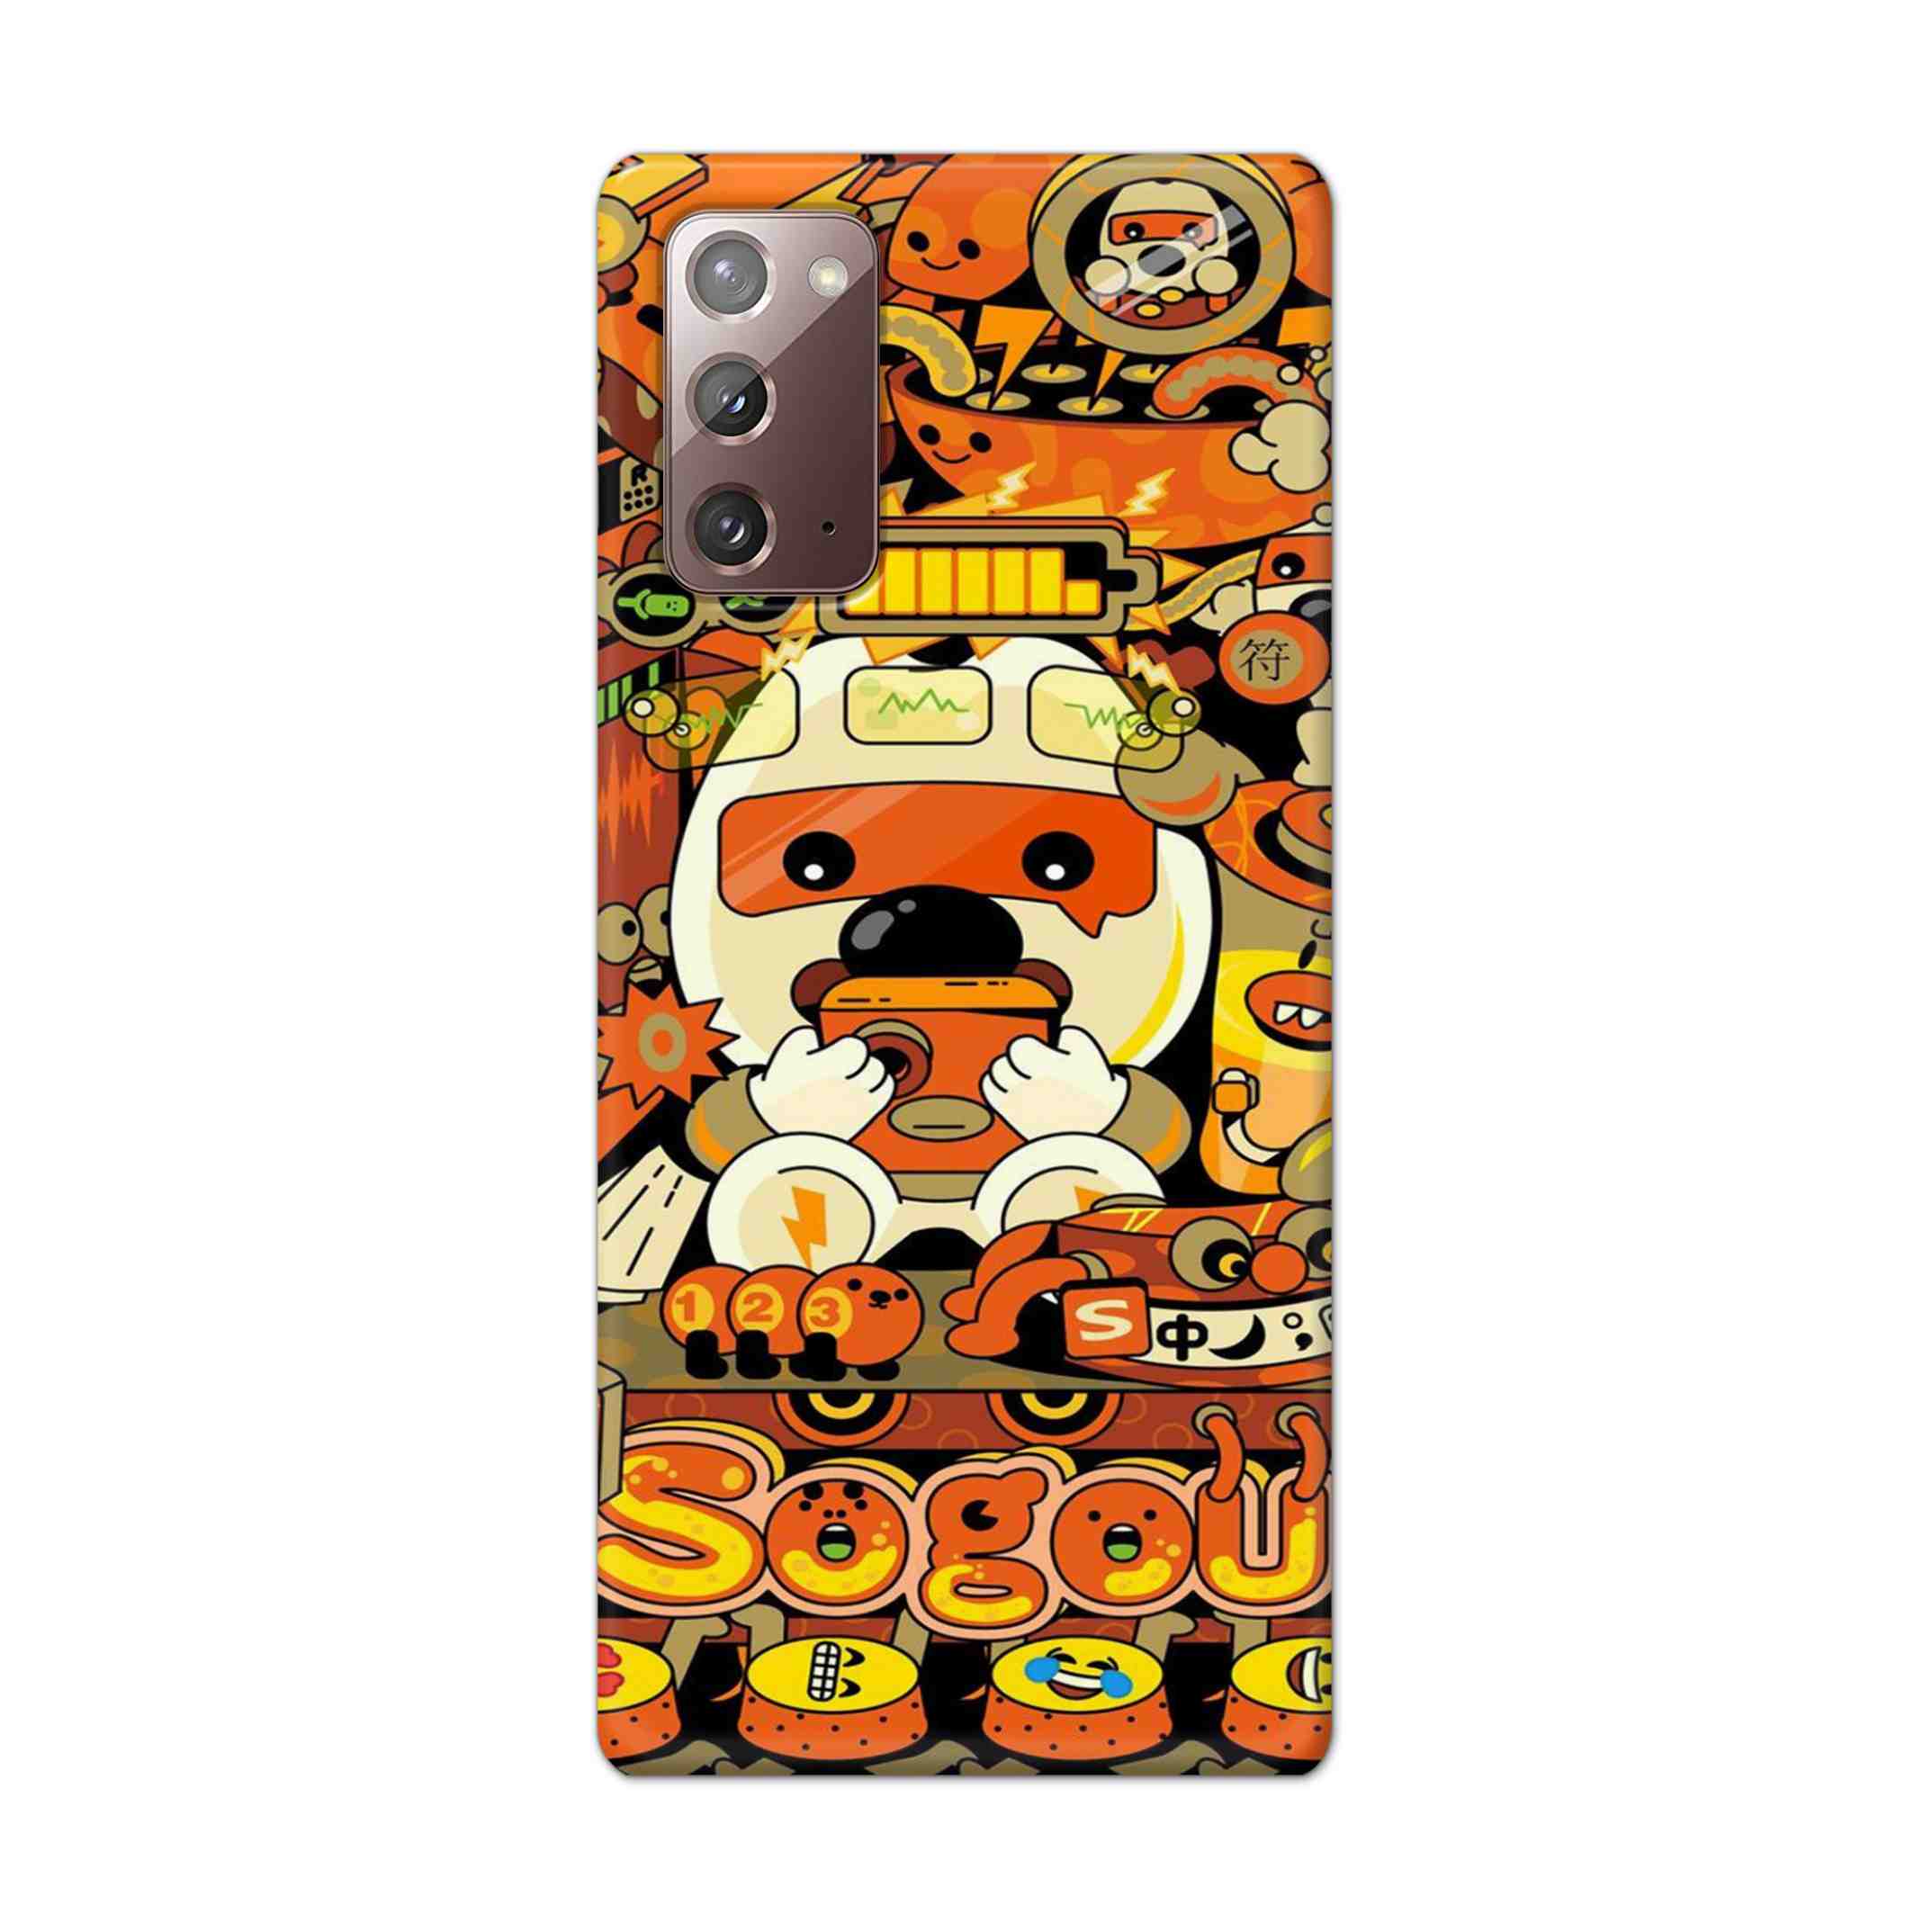 Buy Sogou Hard Back Mobile Phone Case Cover For Samsung Galaxy Note 20 Online